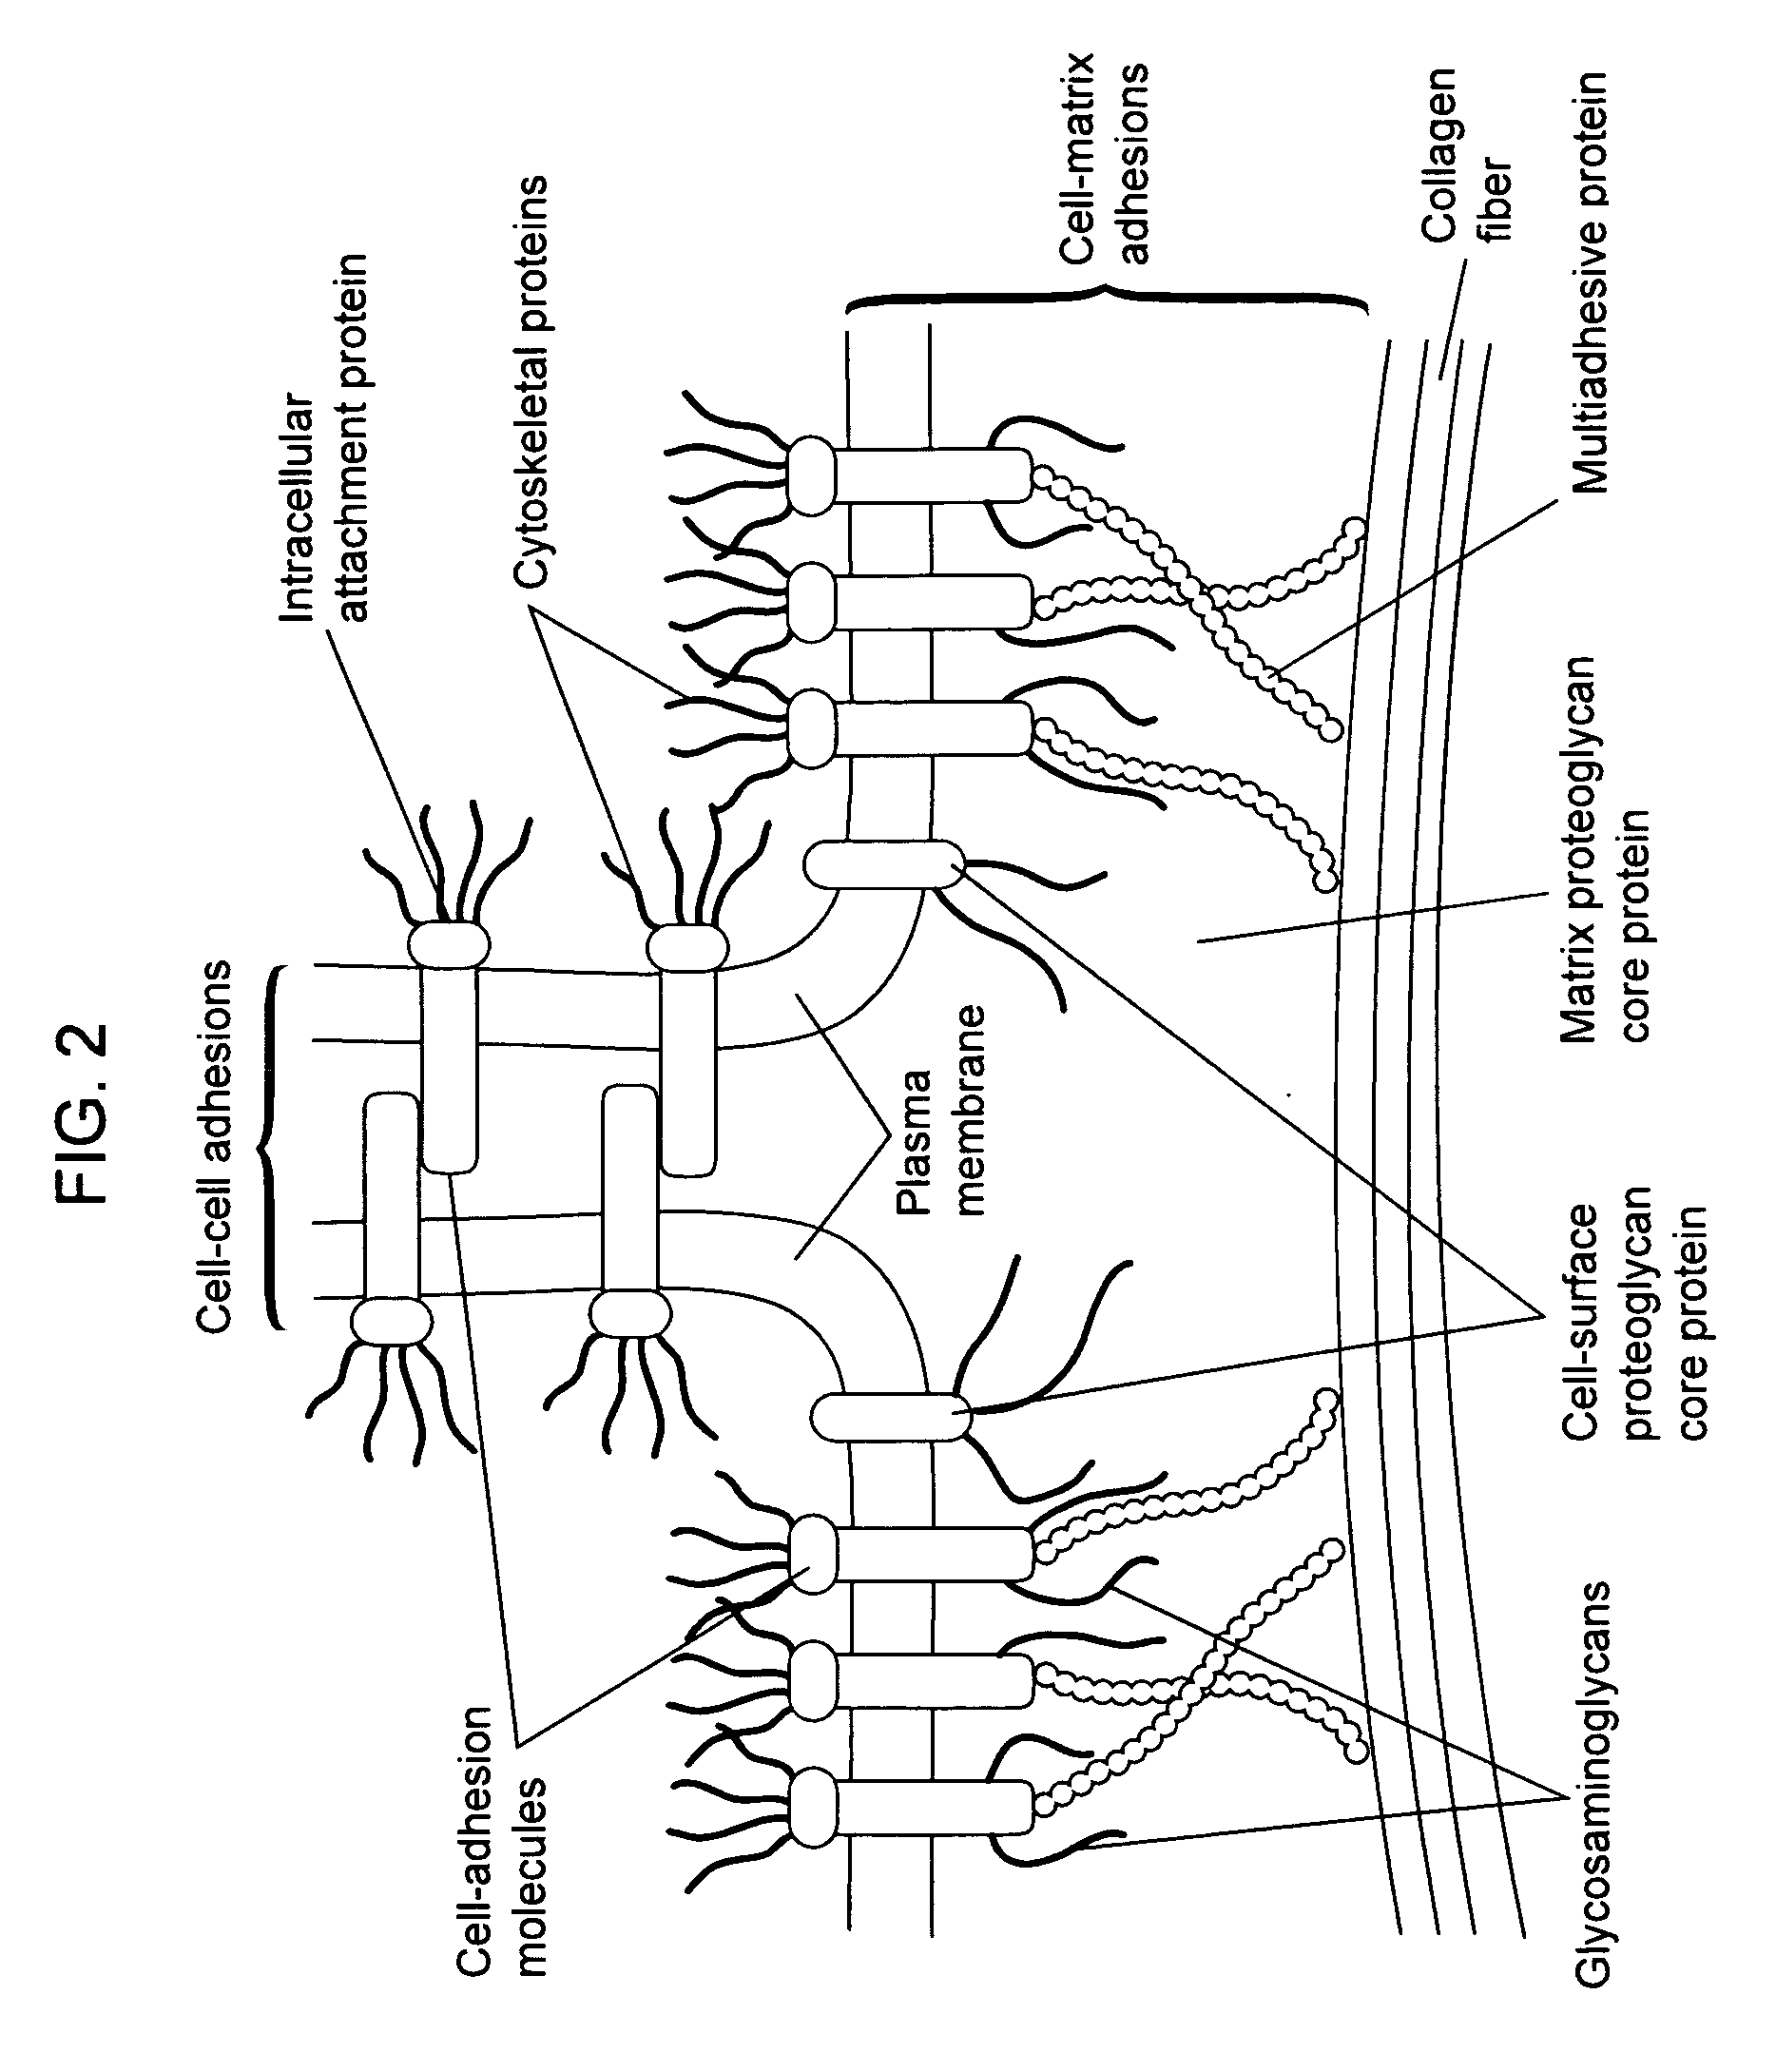 Compositions for regenerating defective or absent myocardium